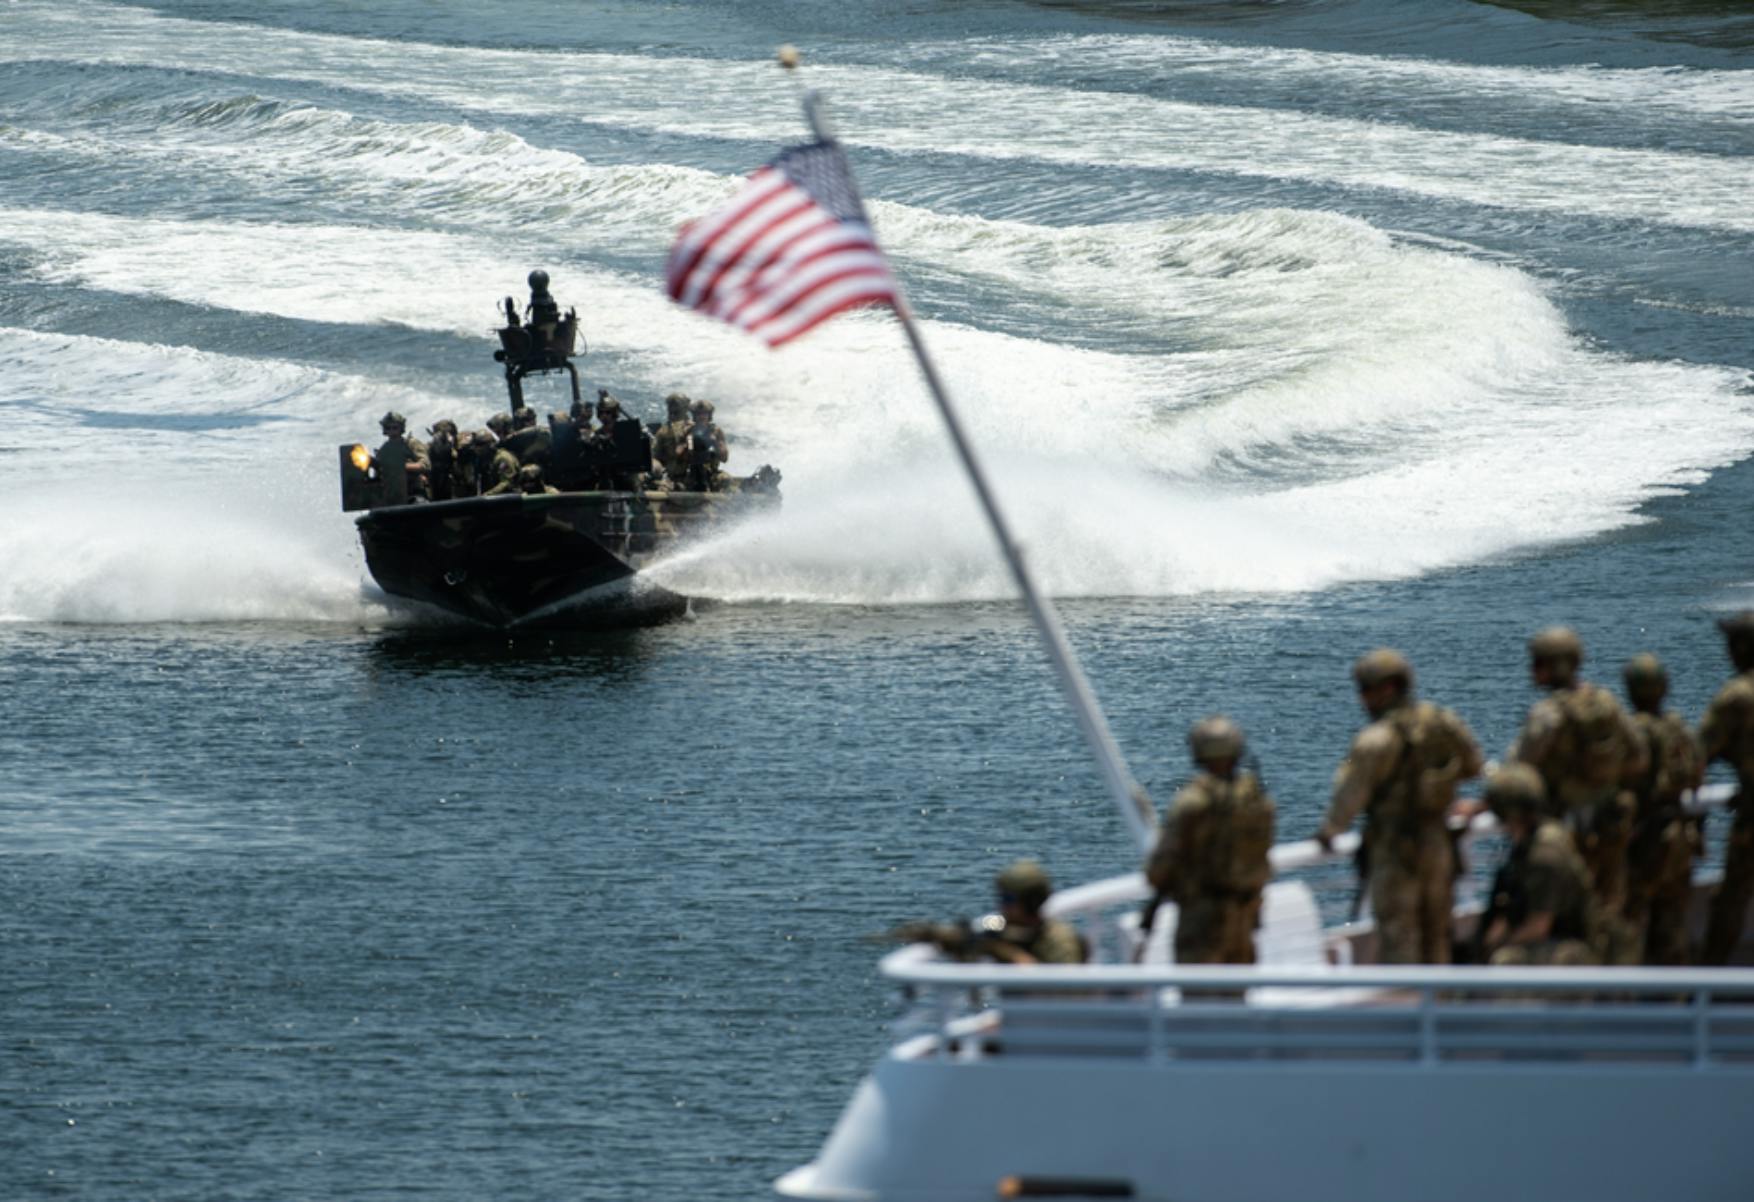 Image of a speed boat full of soldiers heading towards a larger cutter also with soldiers and the American flag hanging off the bow. Related to: navy digital modernization, ai digital transformation